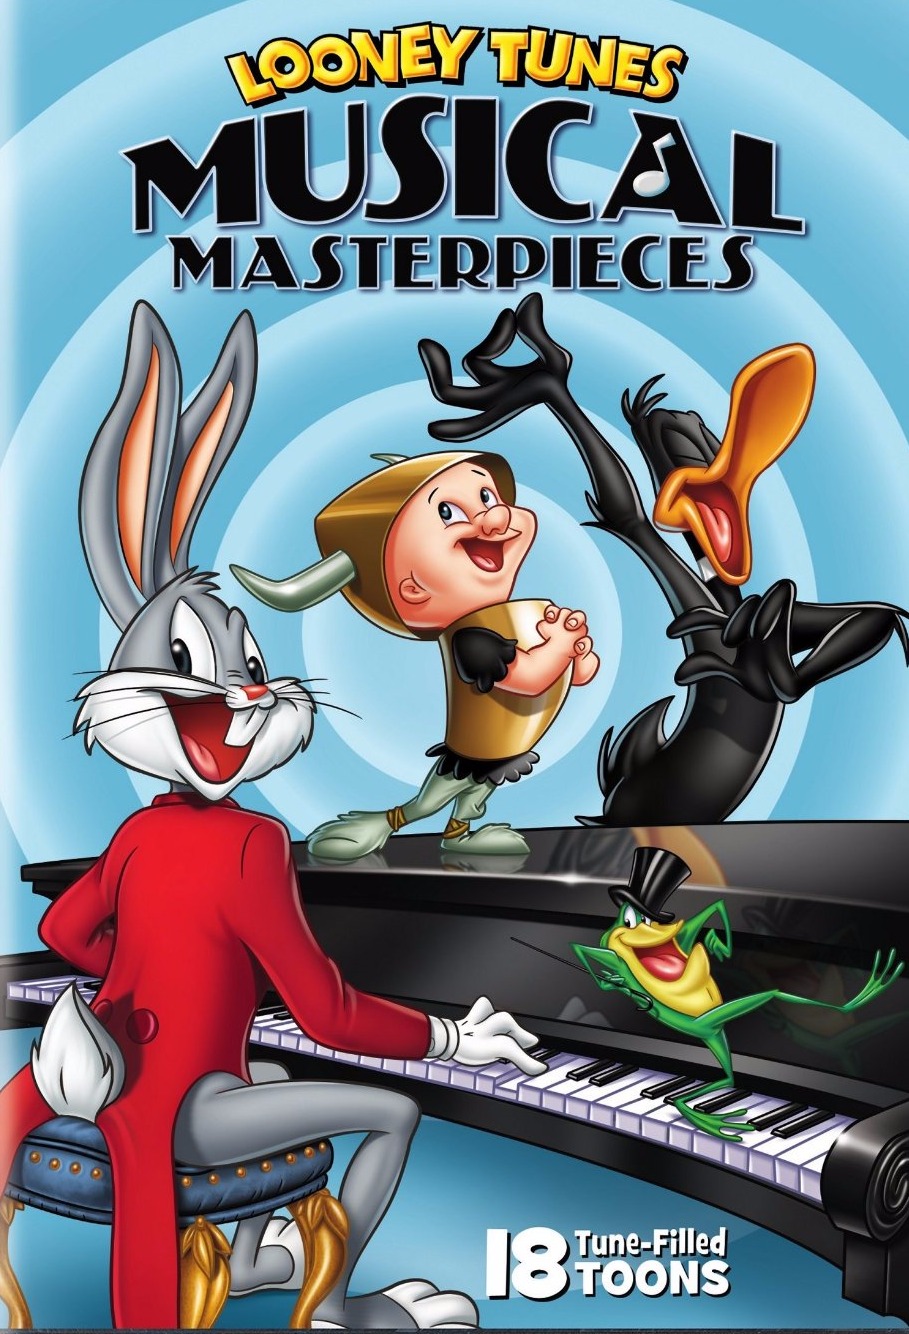 Looney Tunes Musical Masterpieces full collection (1 DVD Box Set)